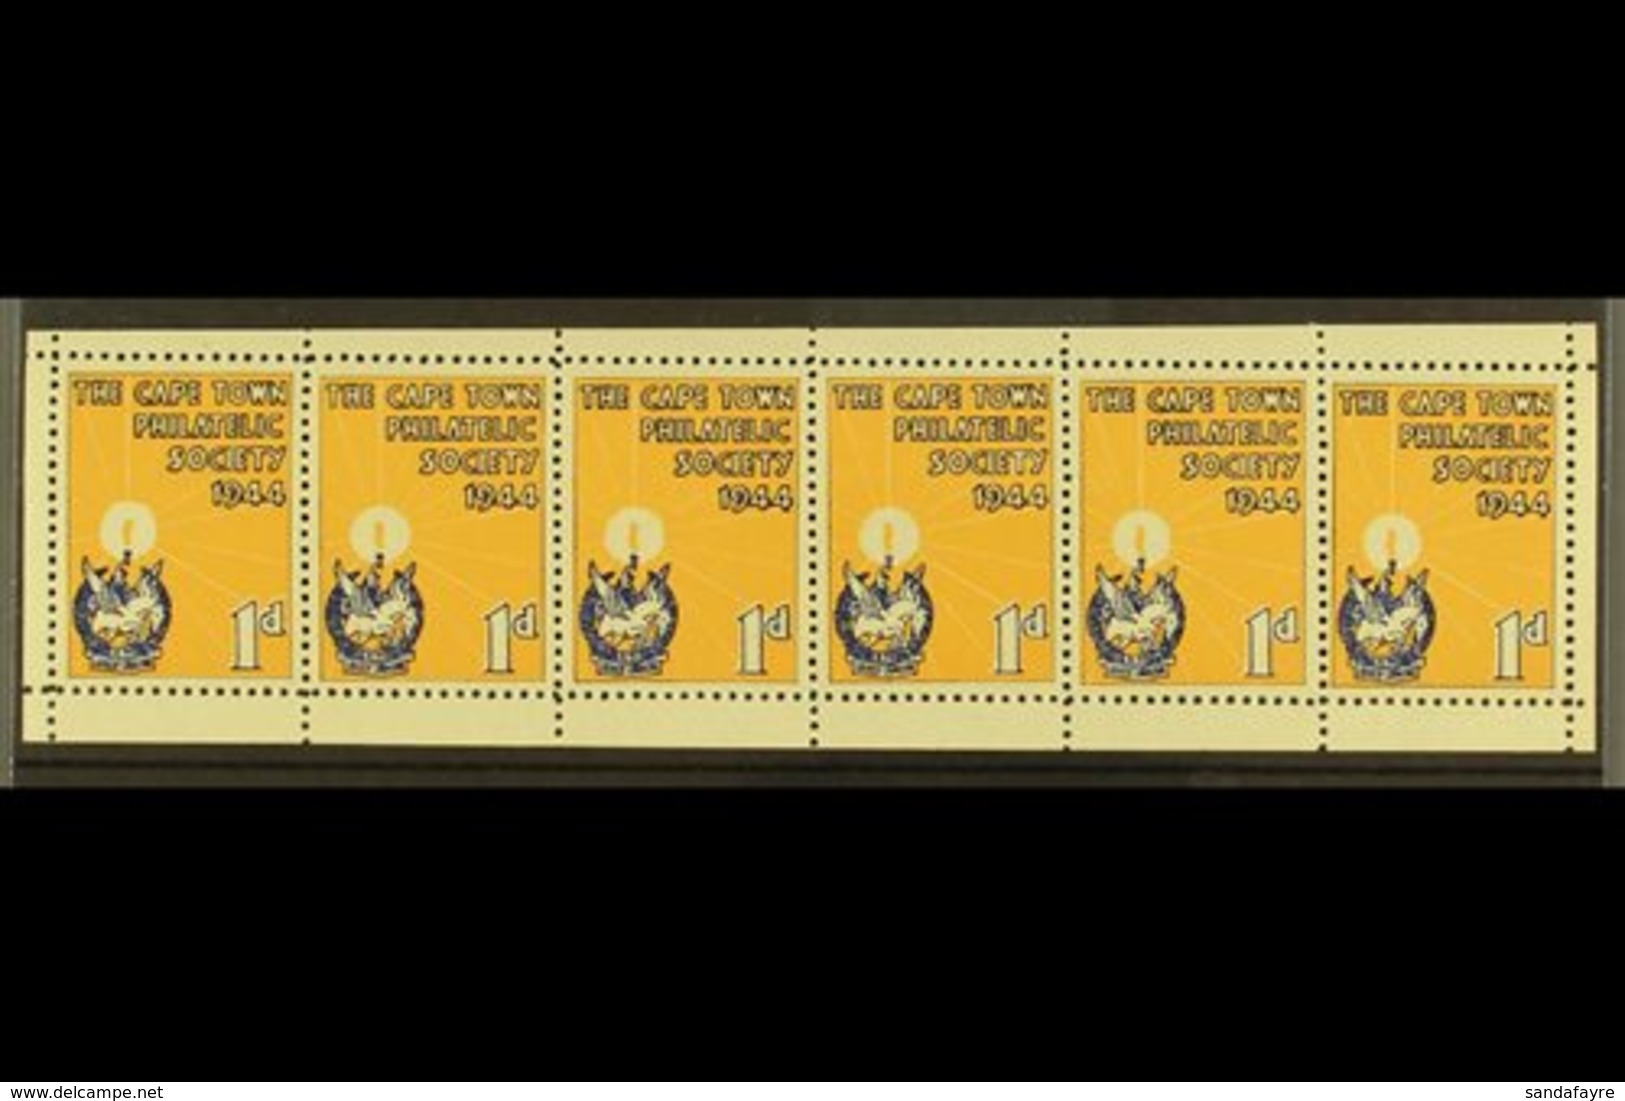 CINDERELLA LABEL  1944 "The Cape Town Philatelic Society" 1d Blue & Buff, Strip Of 6 Labels With Margins All Around, Gum - Sin Clasificación